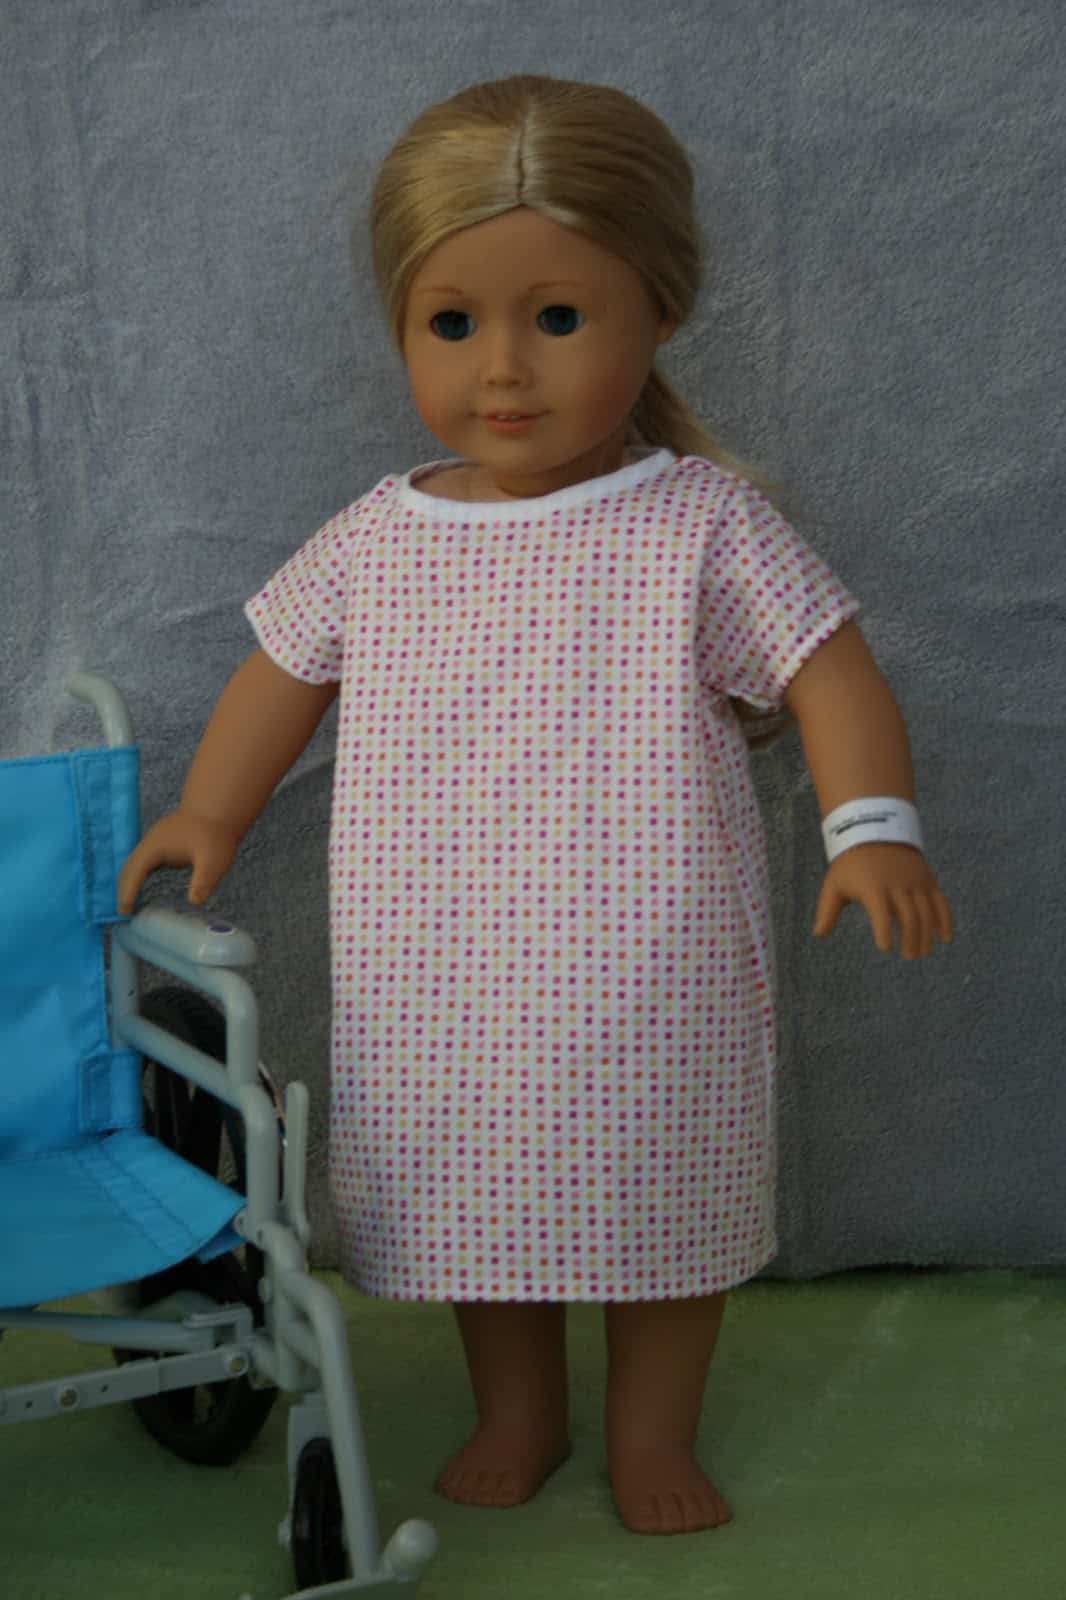 Hospital Gown and wrist band for American Girl doll